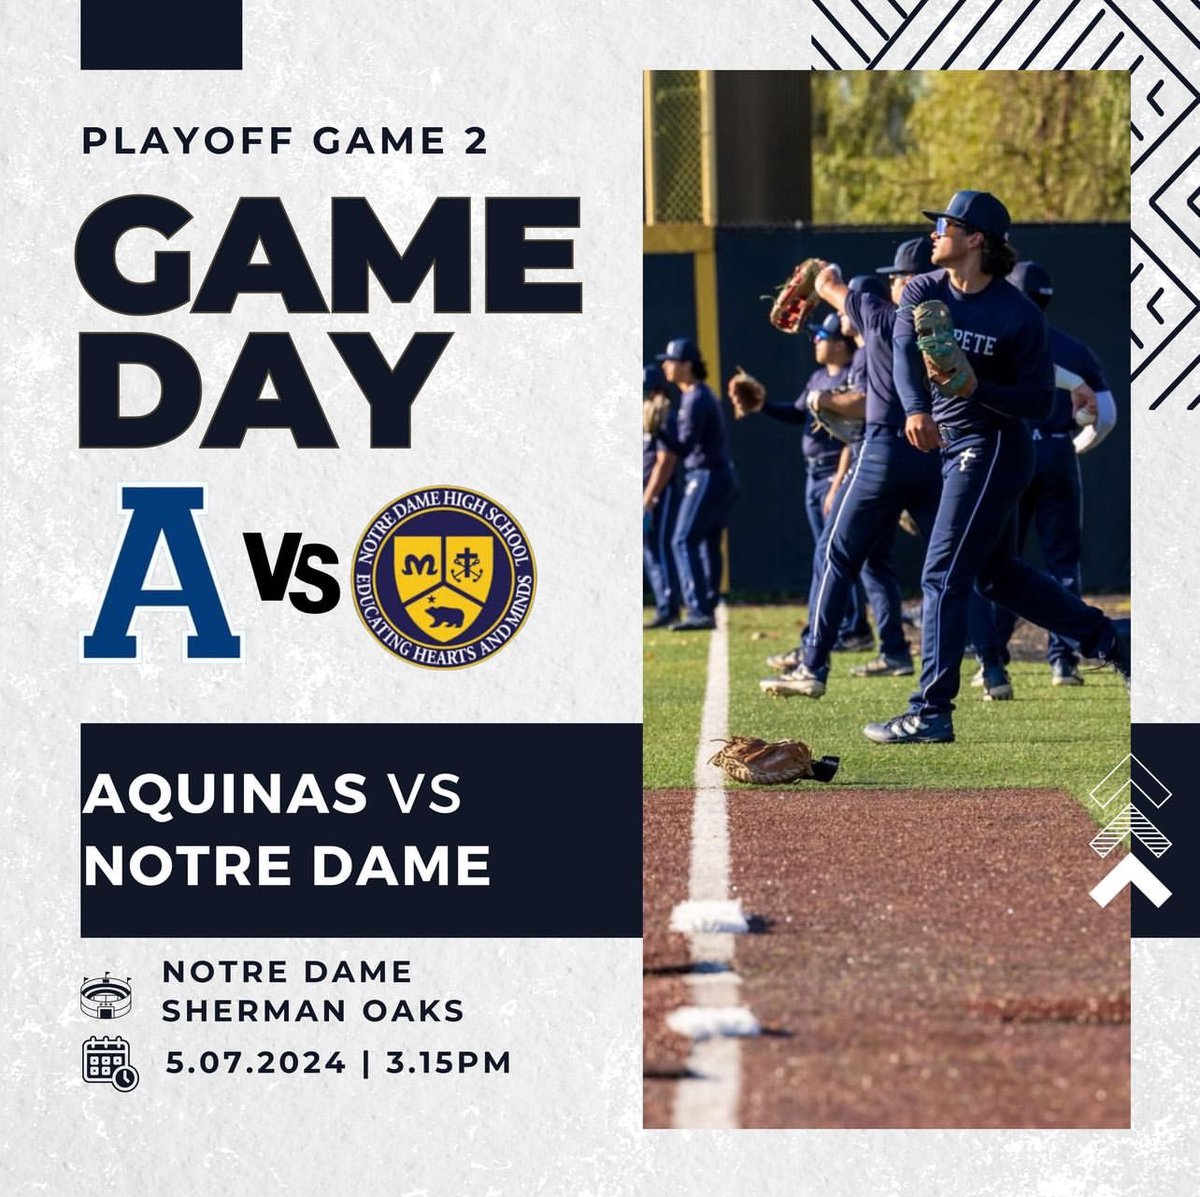 RD2 for the Falcons @AquinasBasebal1 @AquinasAthSB on the road 🚌 vs. Notre Dame. Every game is GAME 7! It’s go time. #WorkWins #Compete @IE_Baseball_HQ @210PrepSports @CalHiSports @HSprepbaseball @PbrCalifornia @SoCalSteve9